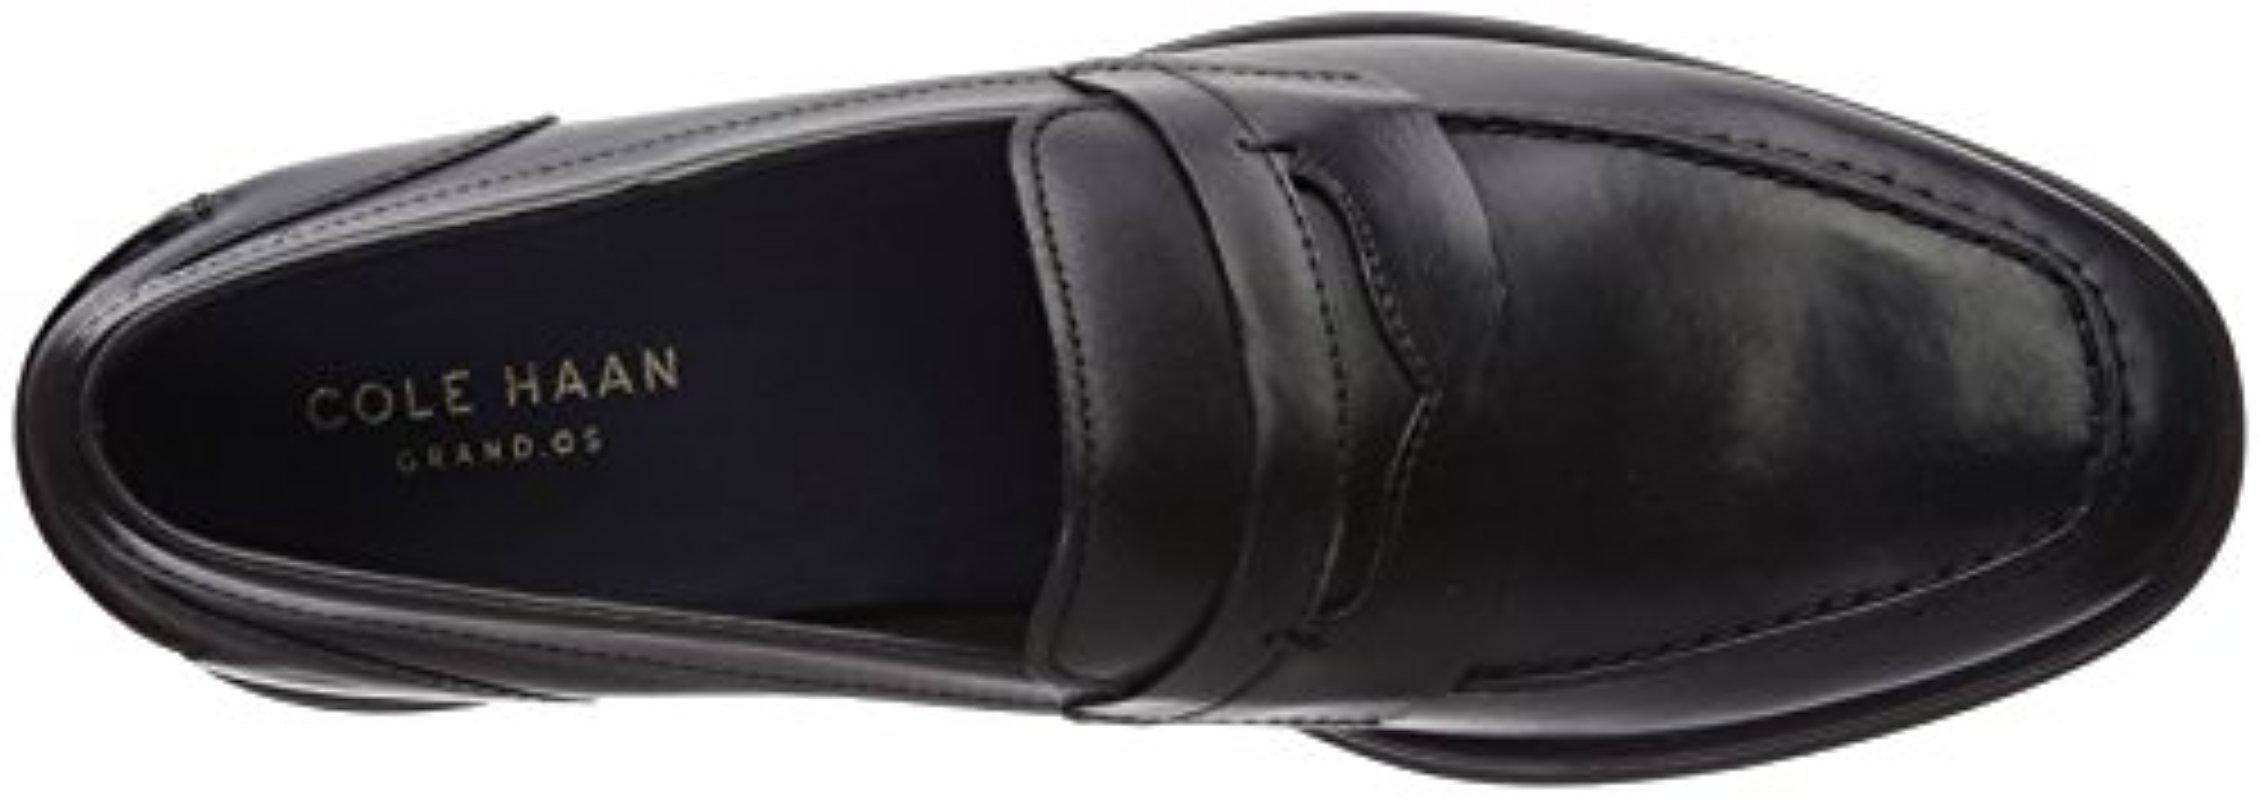 cole haan fleming penny loafer